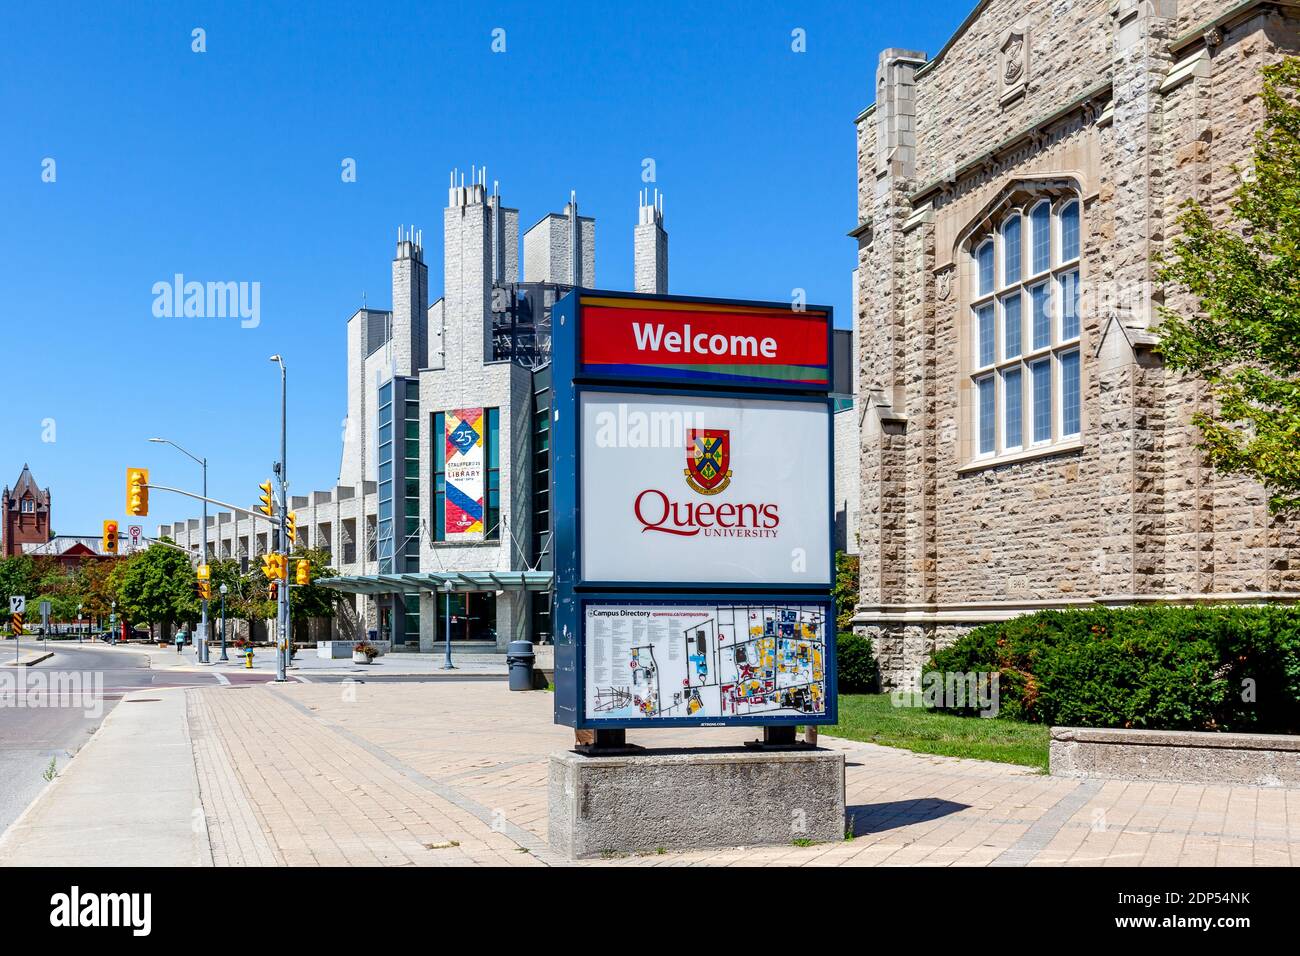 Kingston, Ontario, Canada - August 7, 2020: Queen's University sign with Library building in background at the campus in Kingston, Ontario, Canada Stock Photo